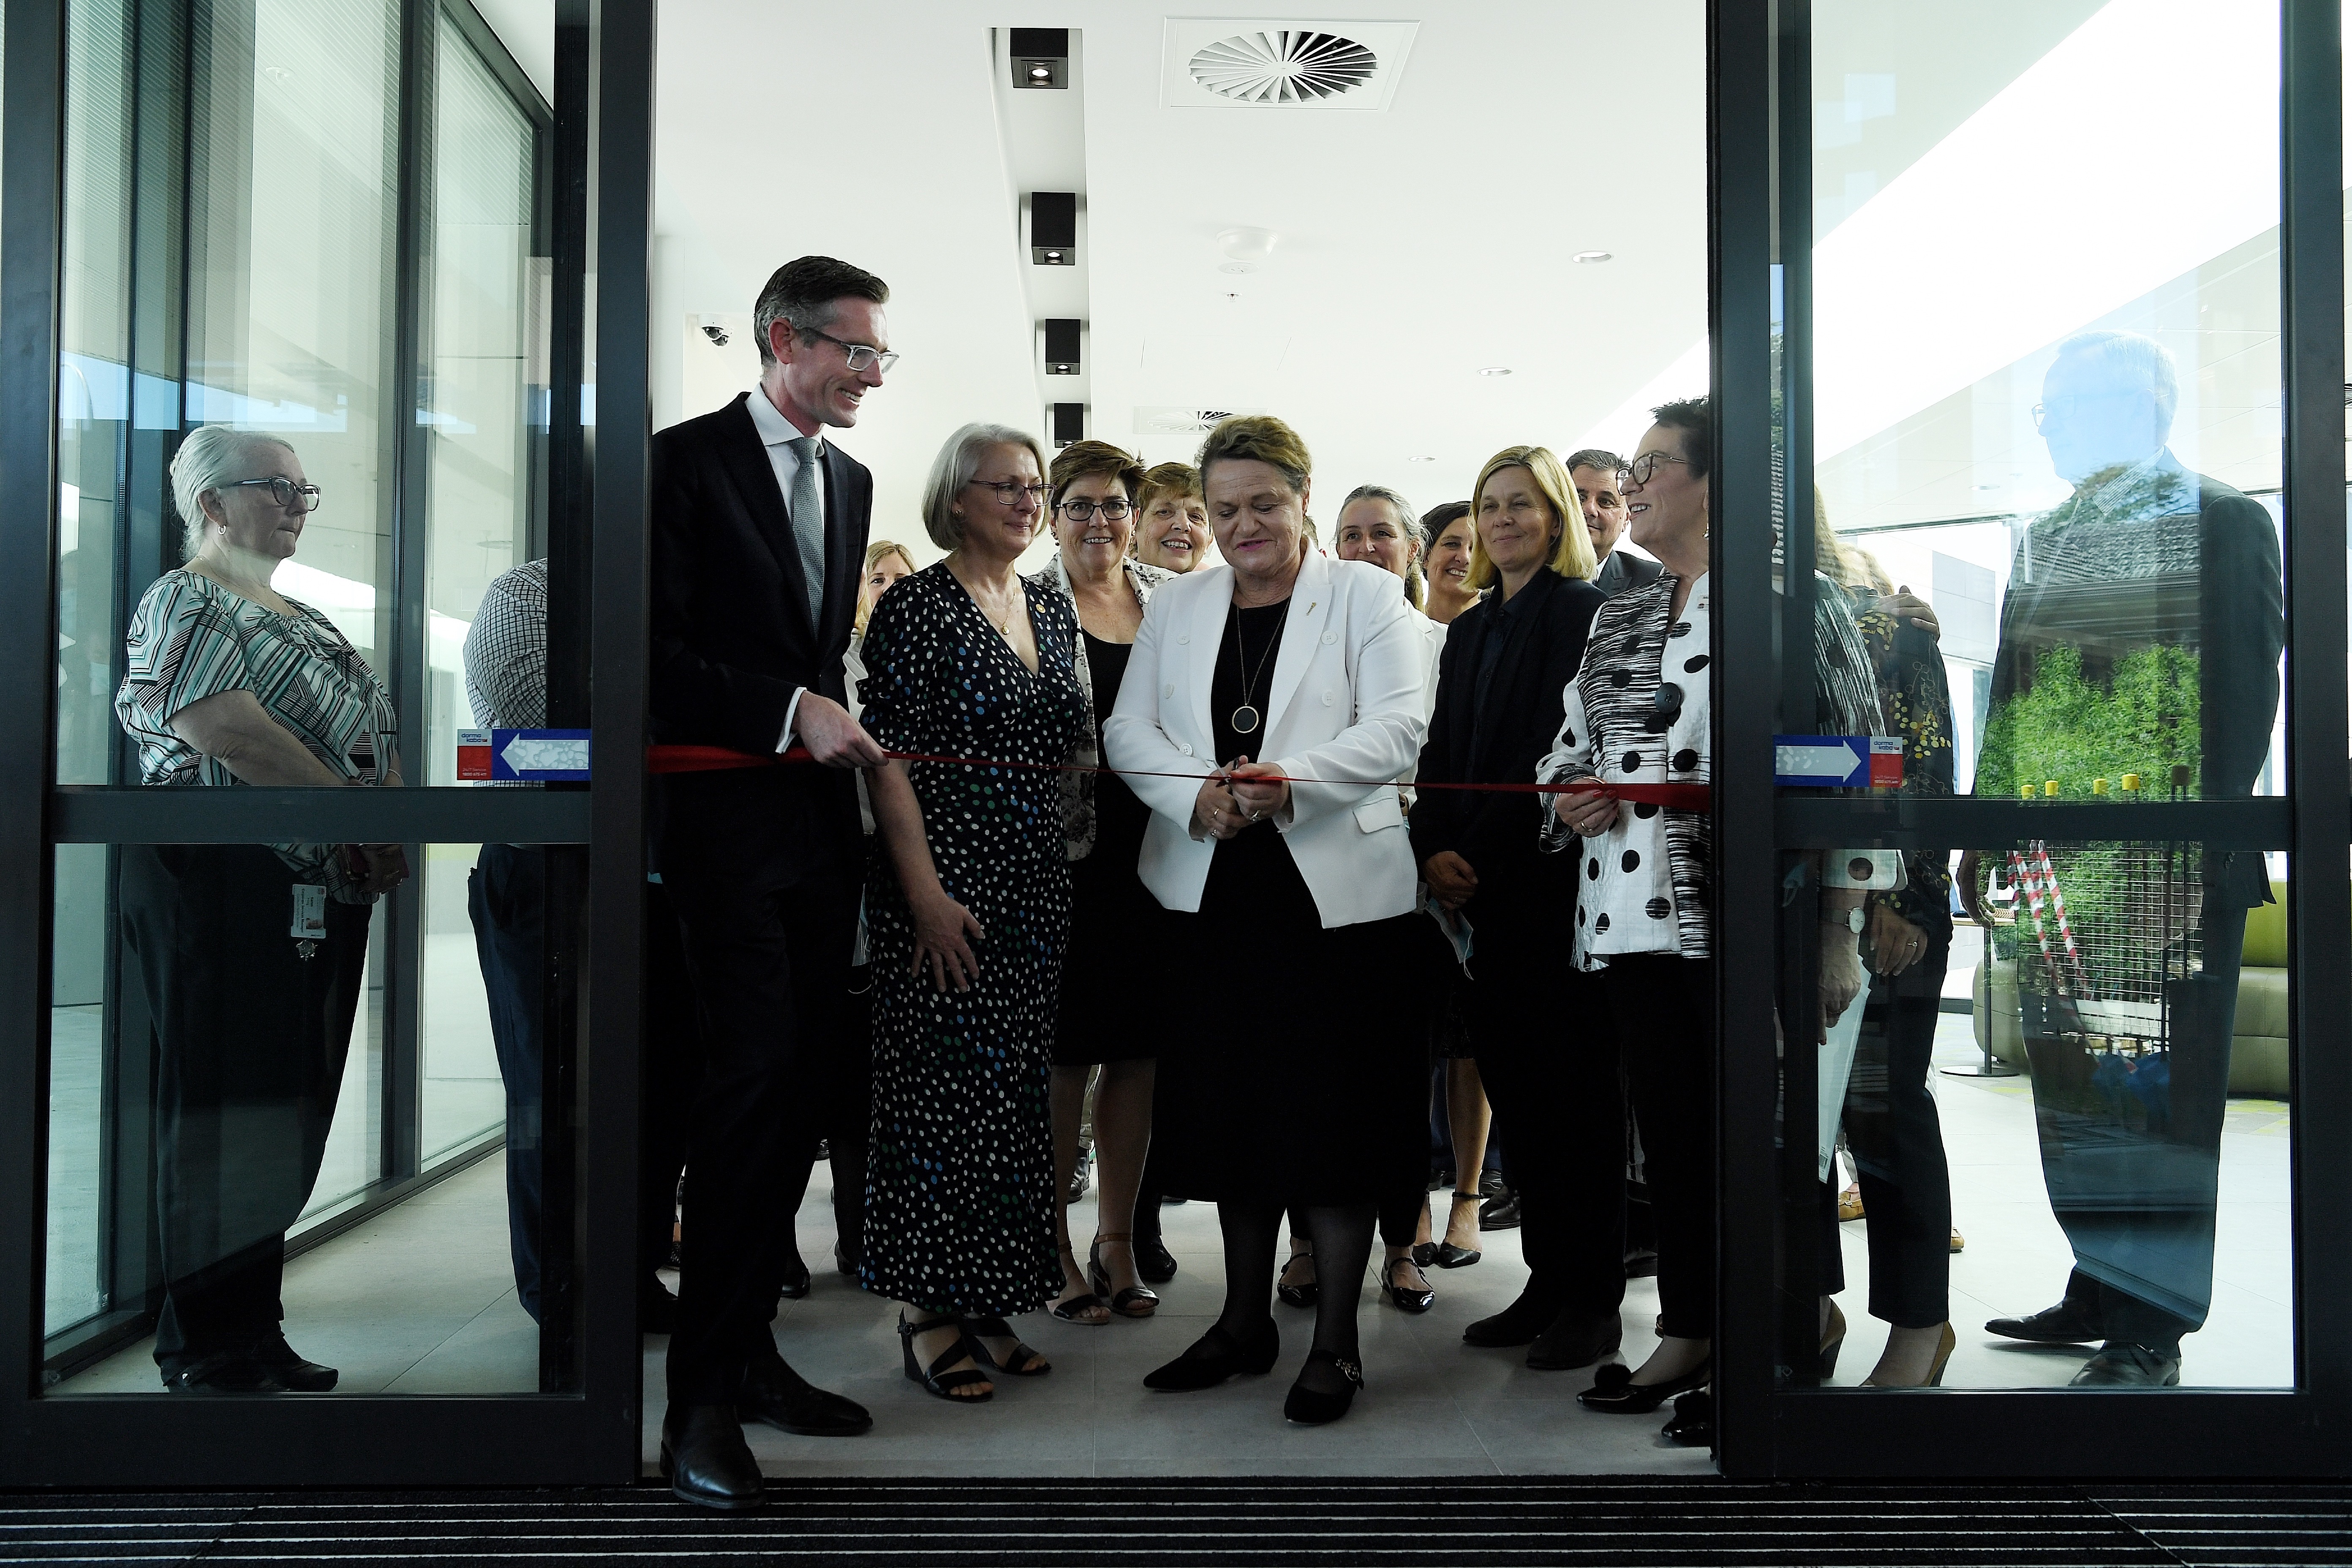 NSW Premier Dominic Perrottet (2nd from left) and Wendy Tuckerman MP (centre white jacket) at the opening of the Goulburn Base Hospitals administrative Services building in Goulburn, NSW. 3rd December, 2021. Photo: Kate Geraghty